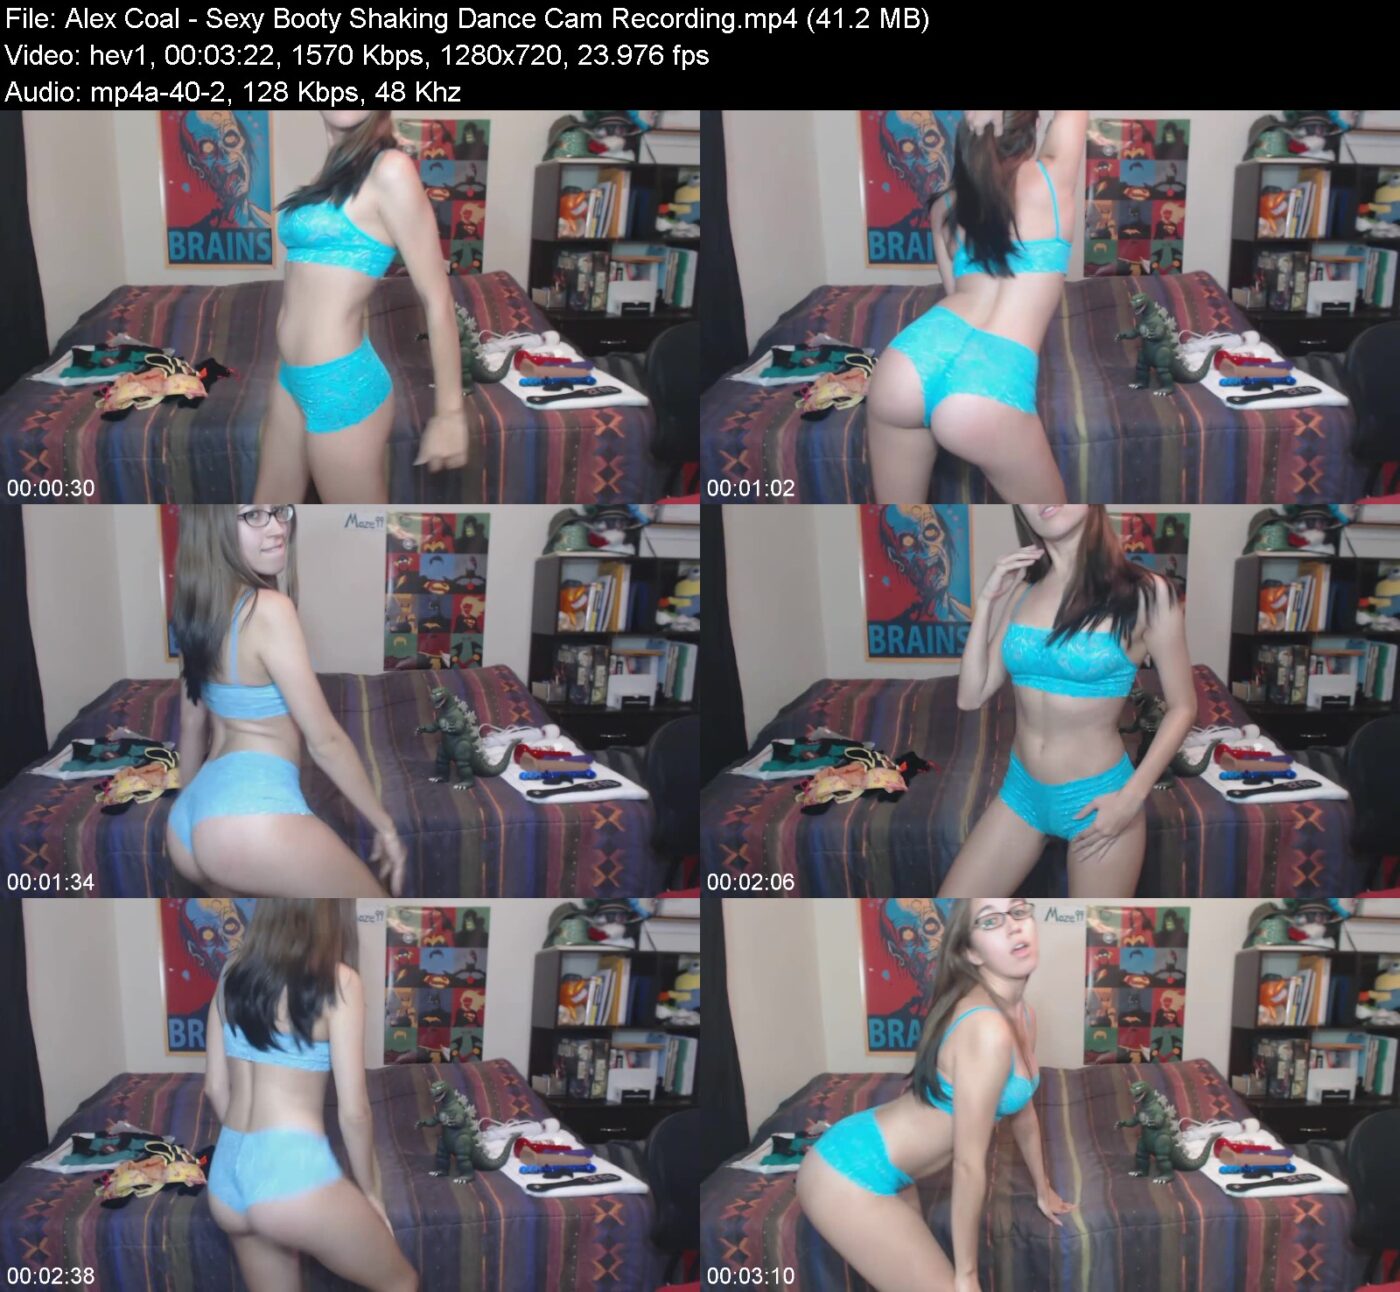 Alex Coal - Sexy Booty Shaking Dance Cam Recording